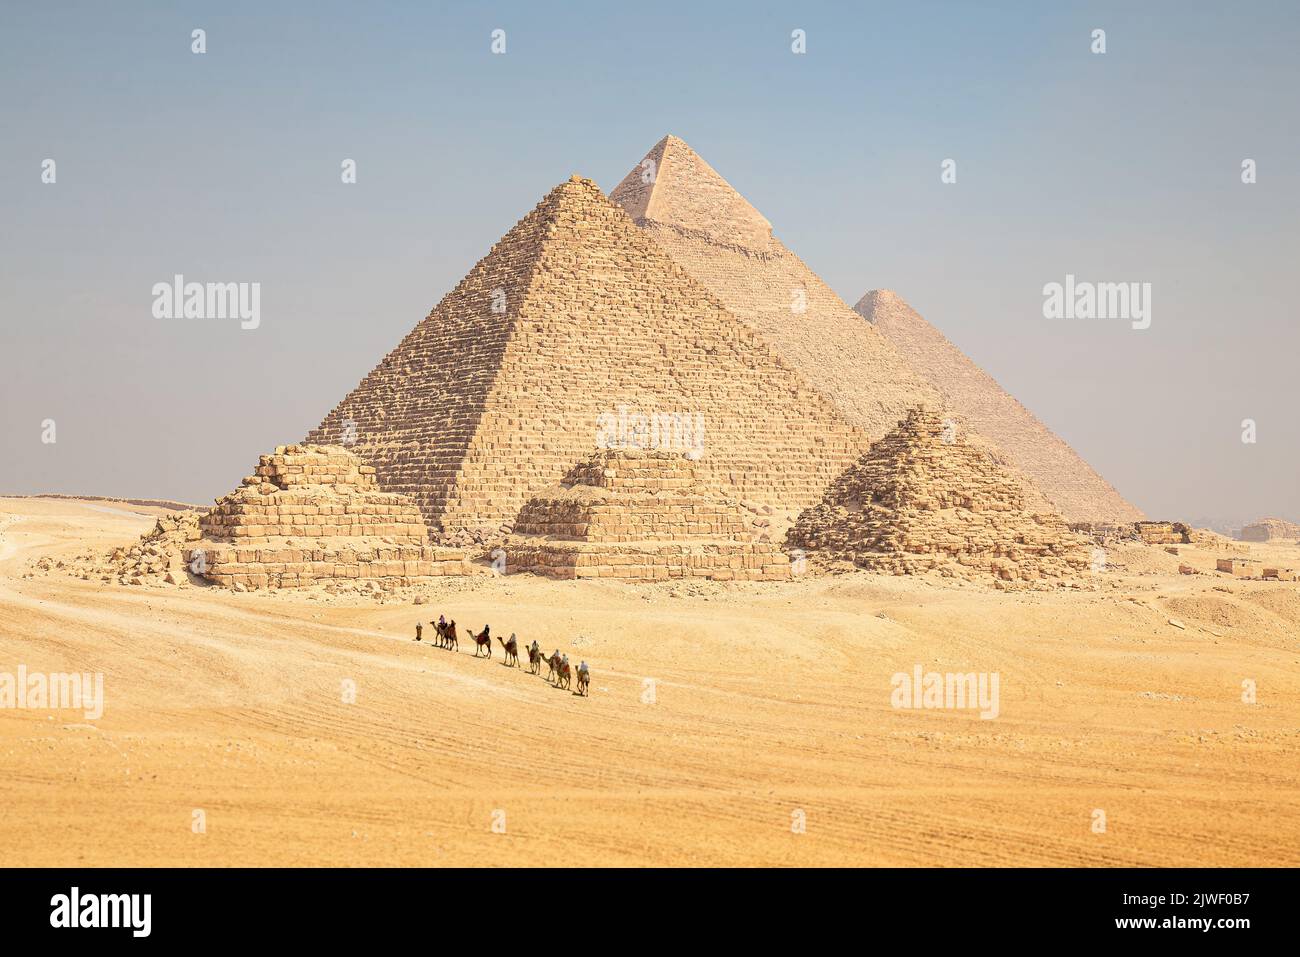 A view of the pyramids at Giza, Egypt Stock Photo